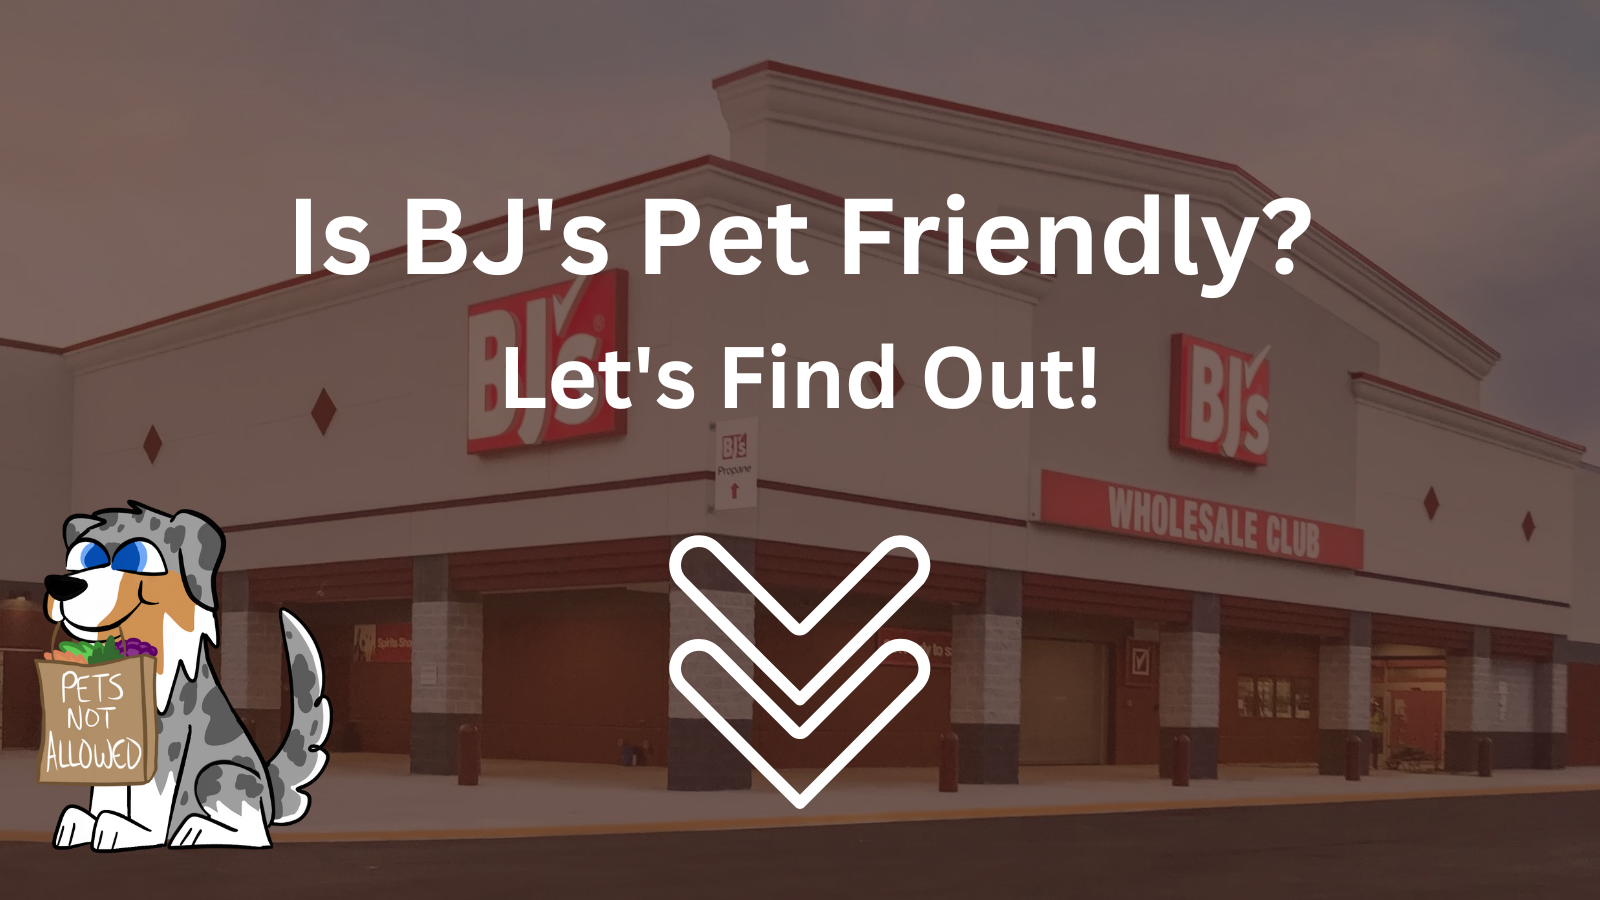 Image Text: "Is BJ's Wholesale Dog-Friendly? Let's Find Out!"